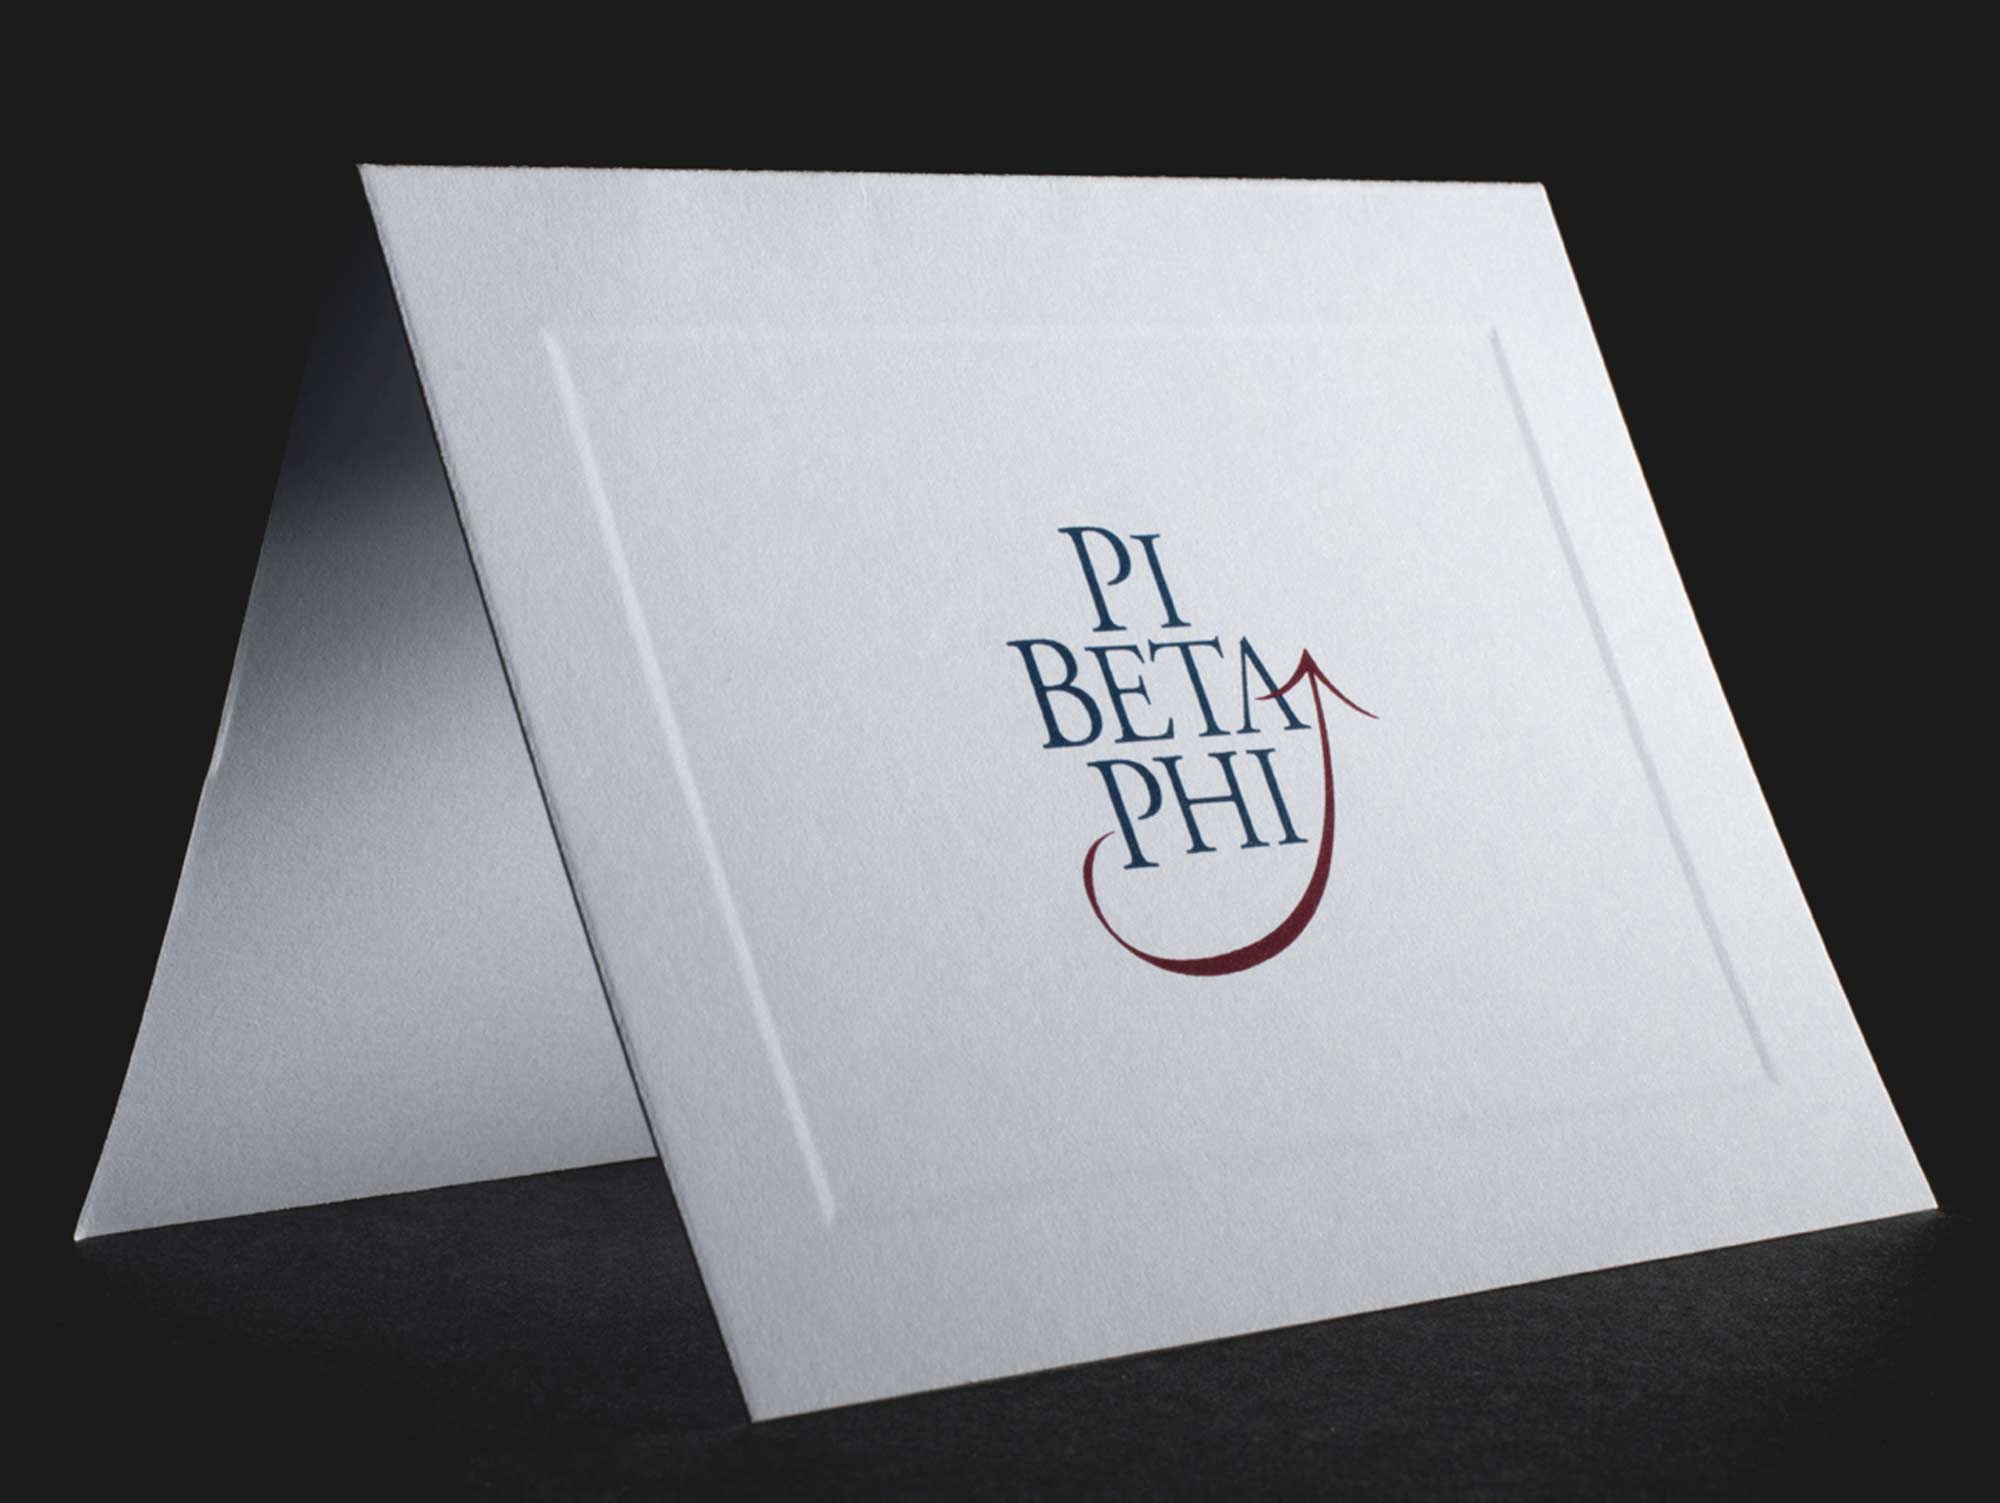 Official Notecards With New Graphic Standard Pi Beta Phi